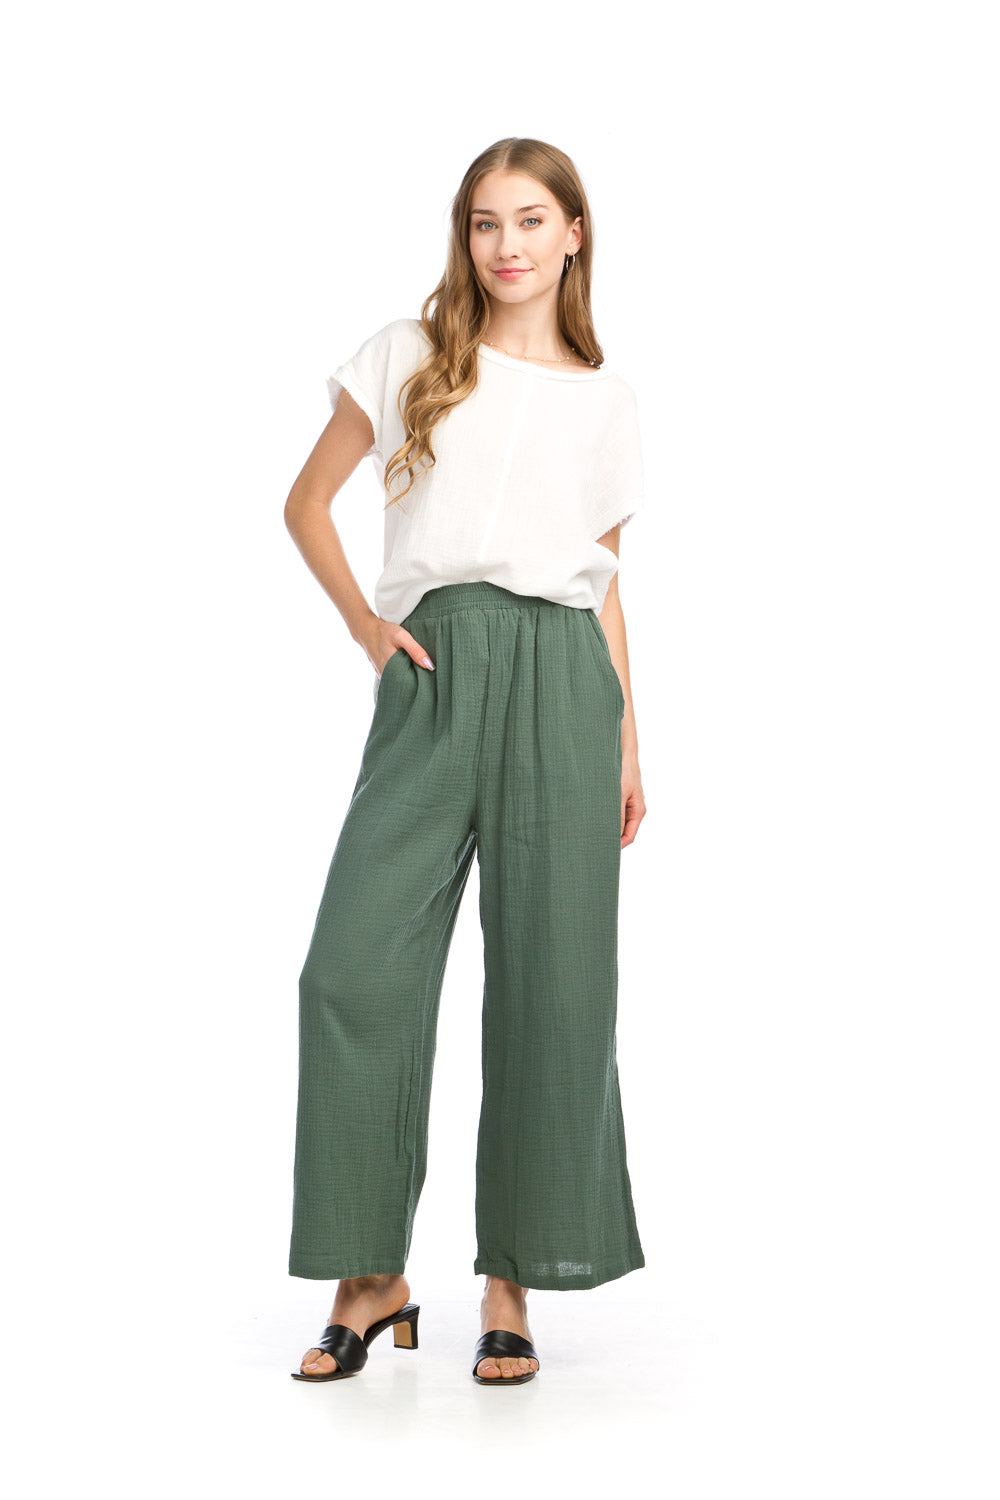 PP-14826 - COTTON GAUZE WIDE LEG PANTS WITH POCKETS AND ELASTIC BACK